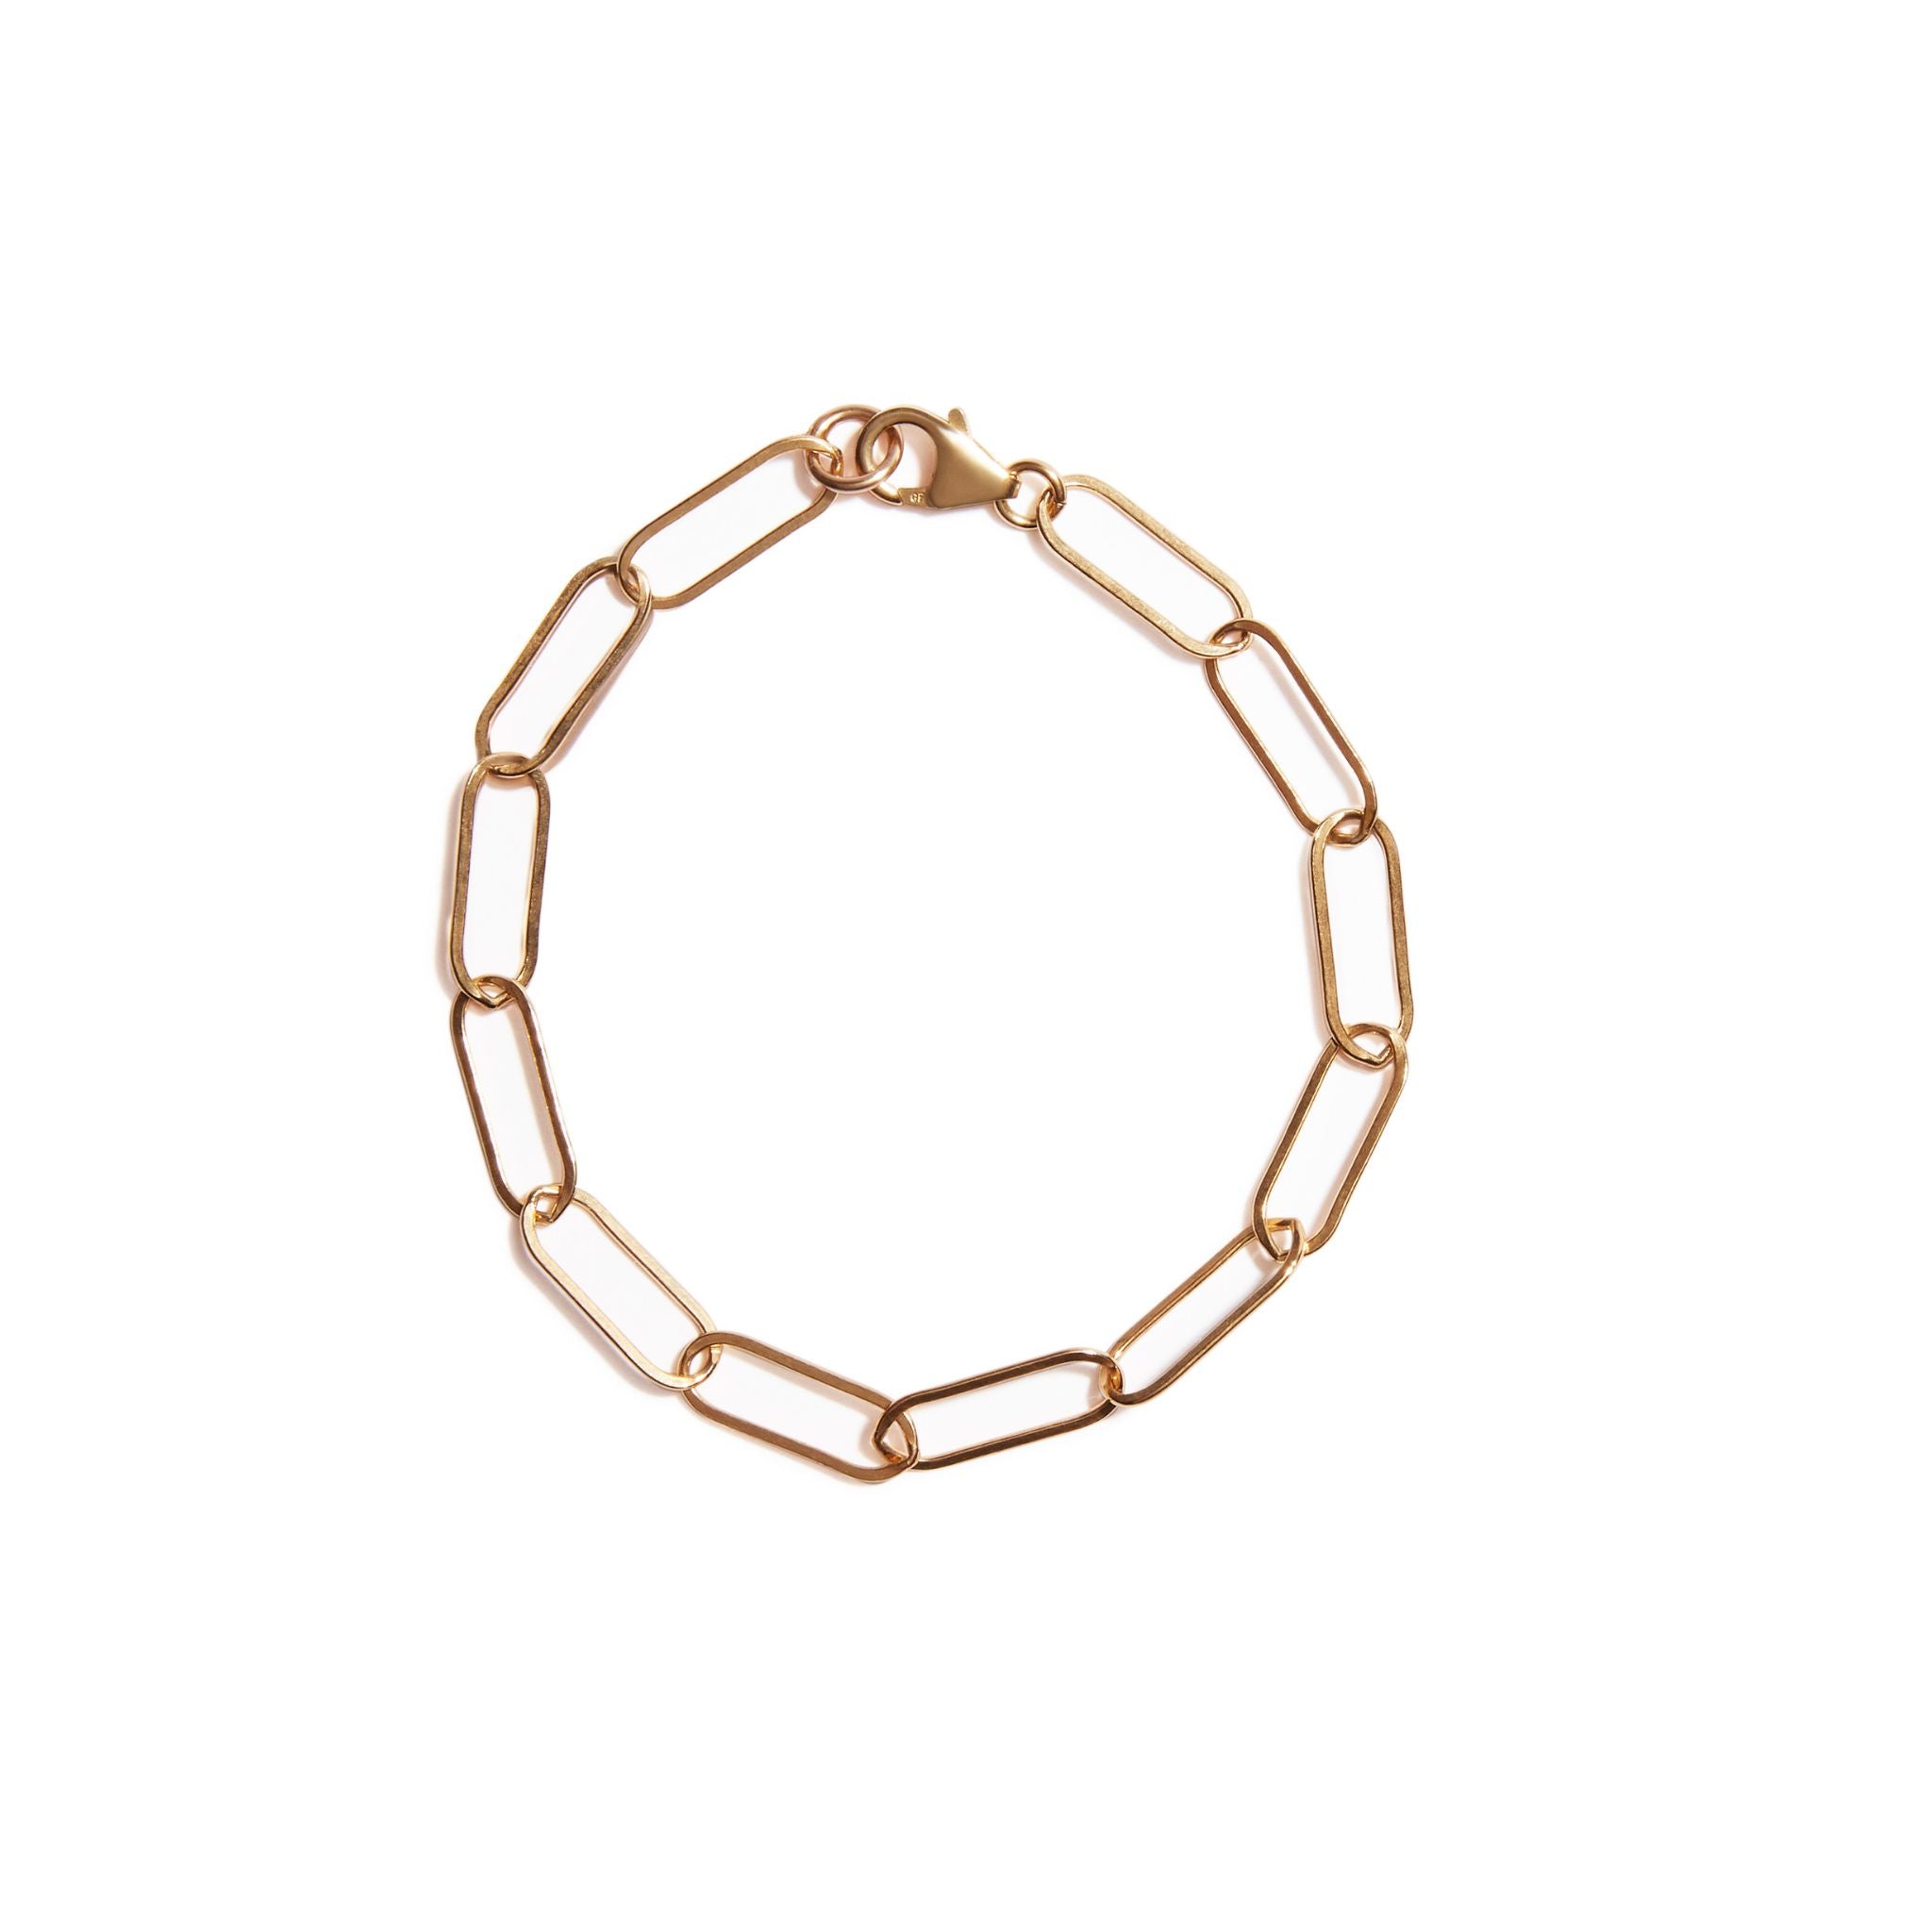 A stylish link bracelet made of 14ct gold fill, perfect for adding a touch of sophistication to your look.